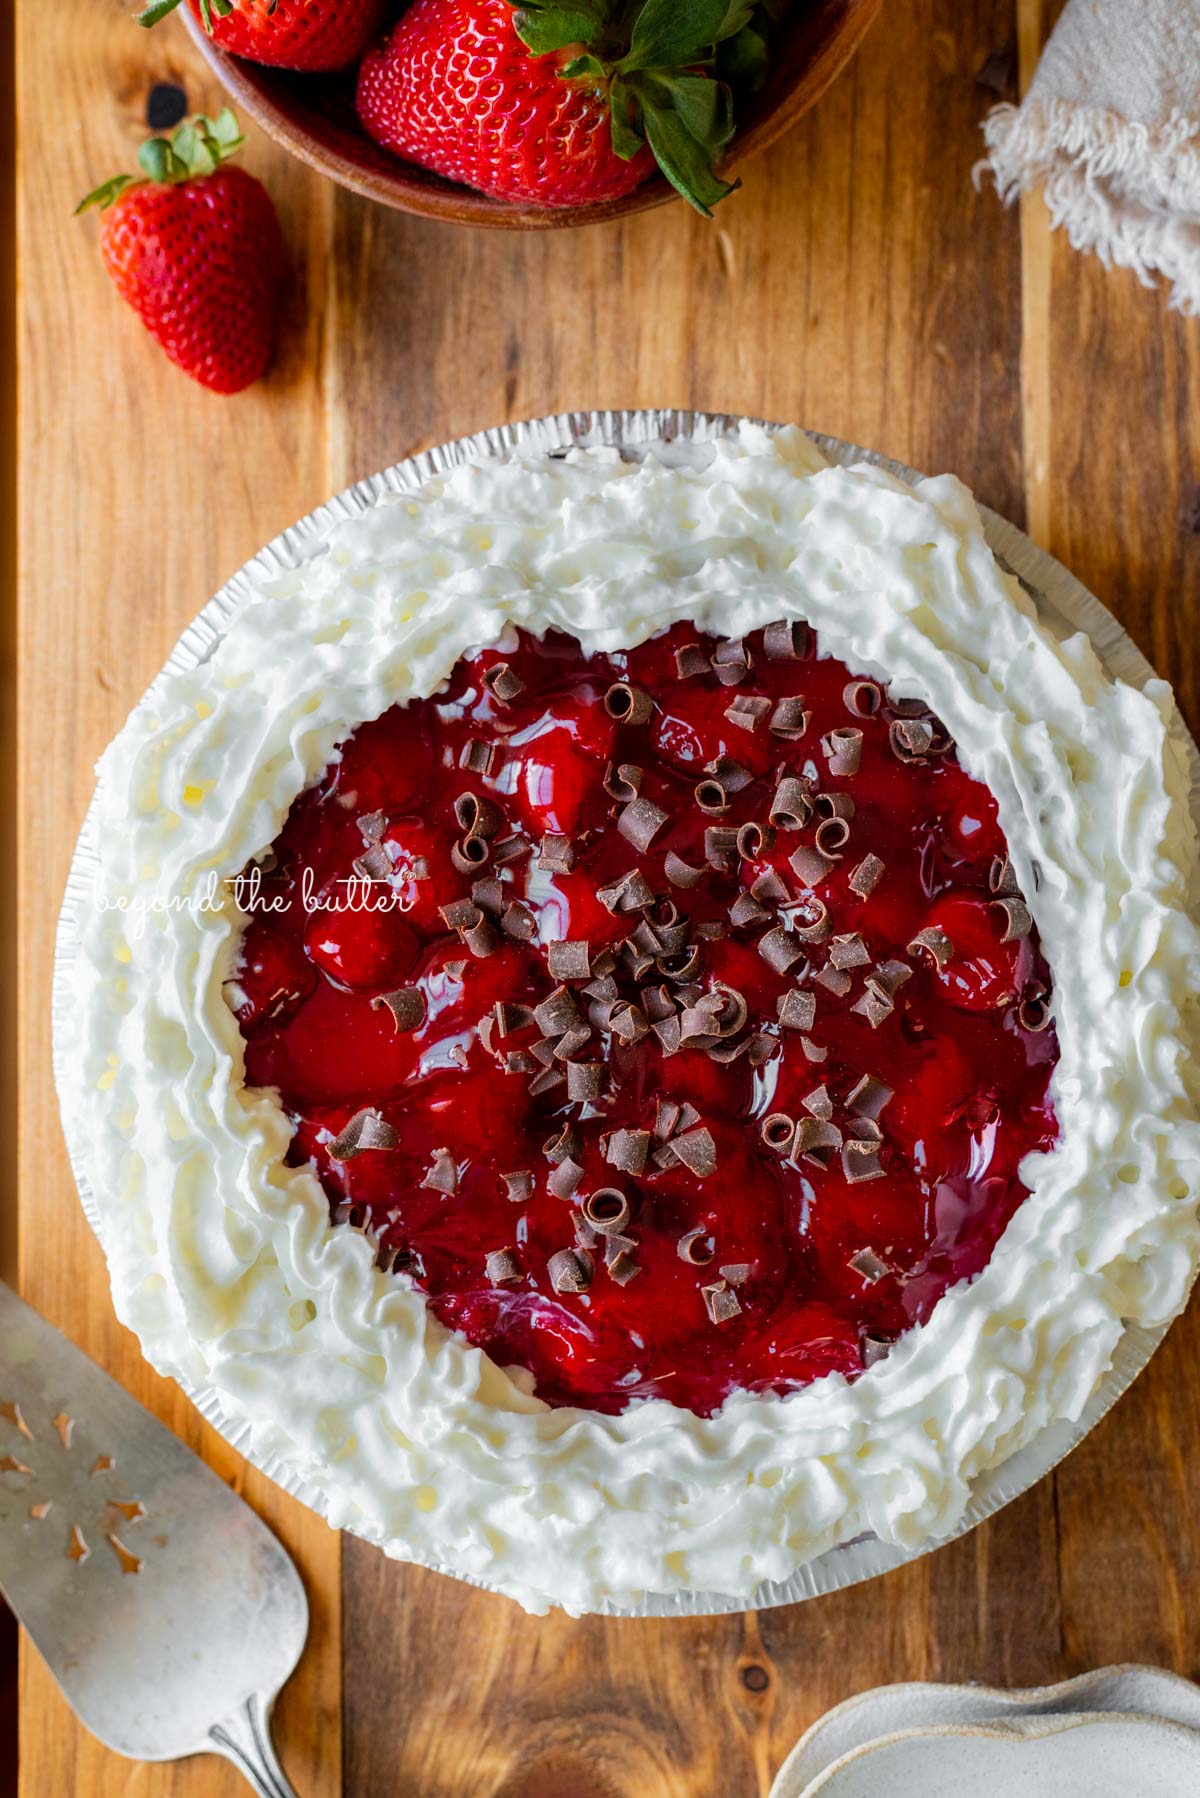 Decorated no bake strawberry chocolate pie with small bowl of strawberries, dessert plates, and pie server on wood table | All images © Beyond the Butter®